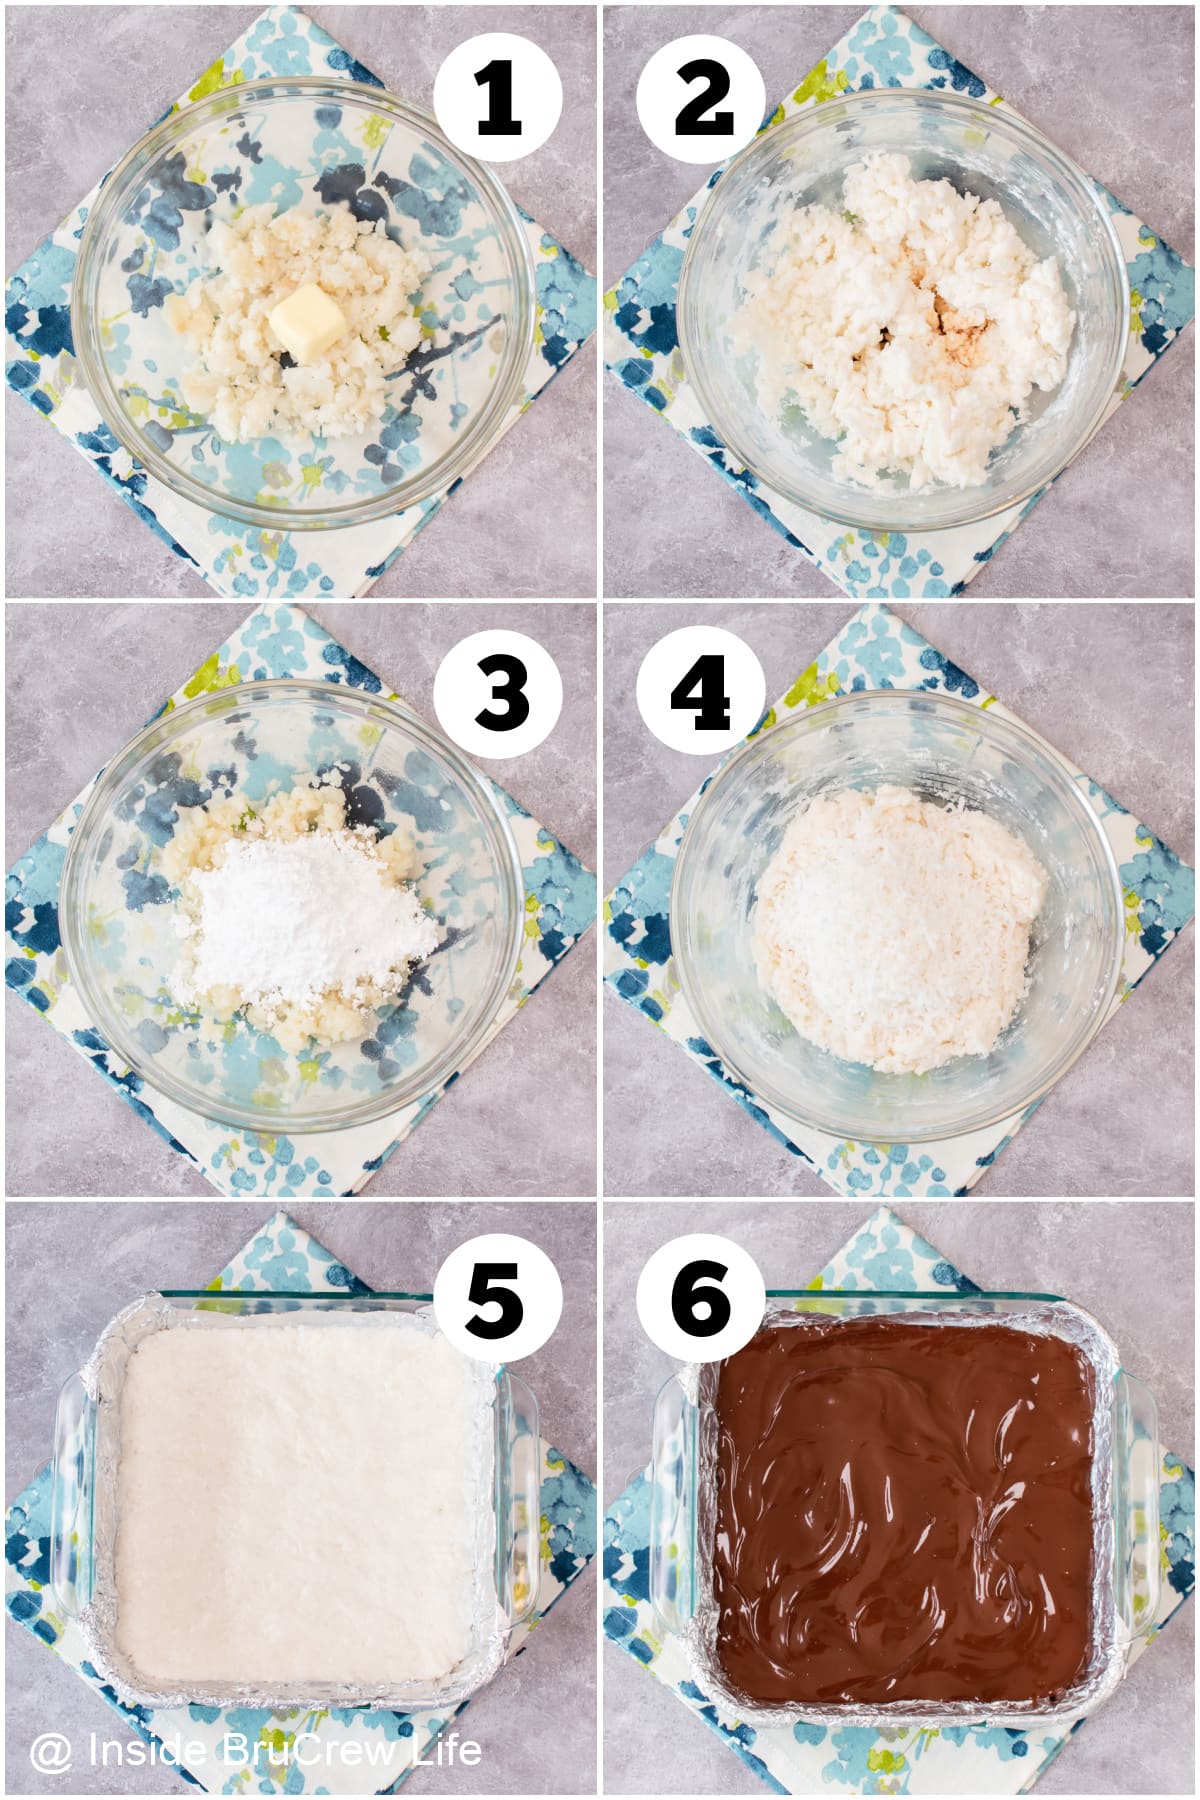 Six pictures collaged together showing how to make chocolate topped coconut potato fudge.